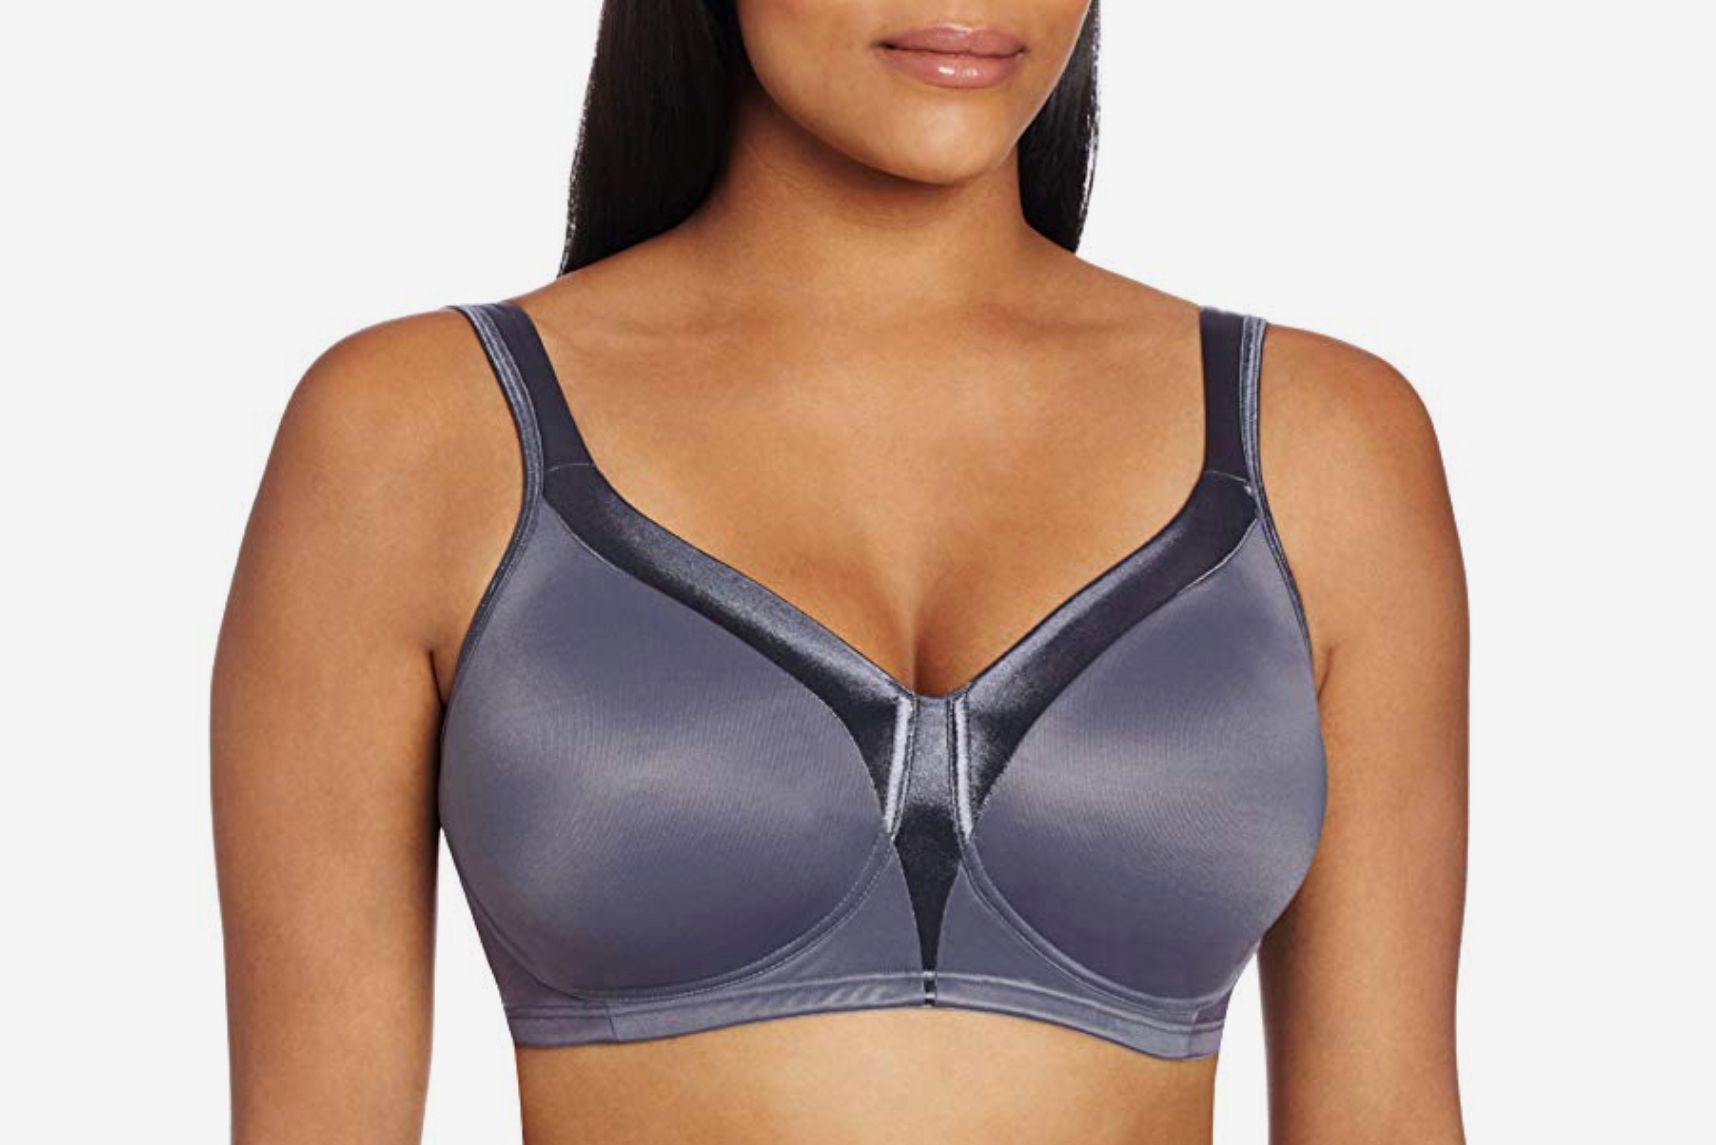 Big breasts? Then you're a big SPENDER: Women with bra sizes